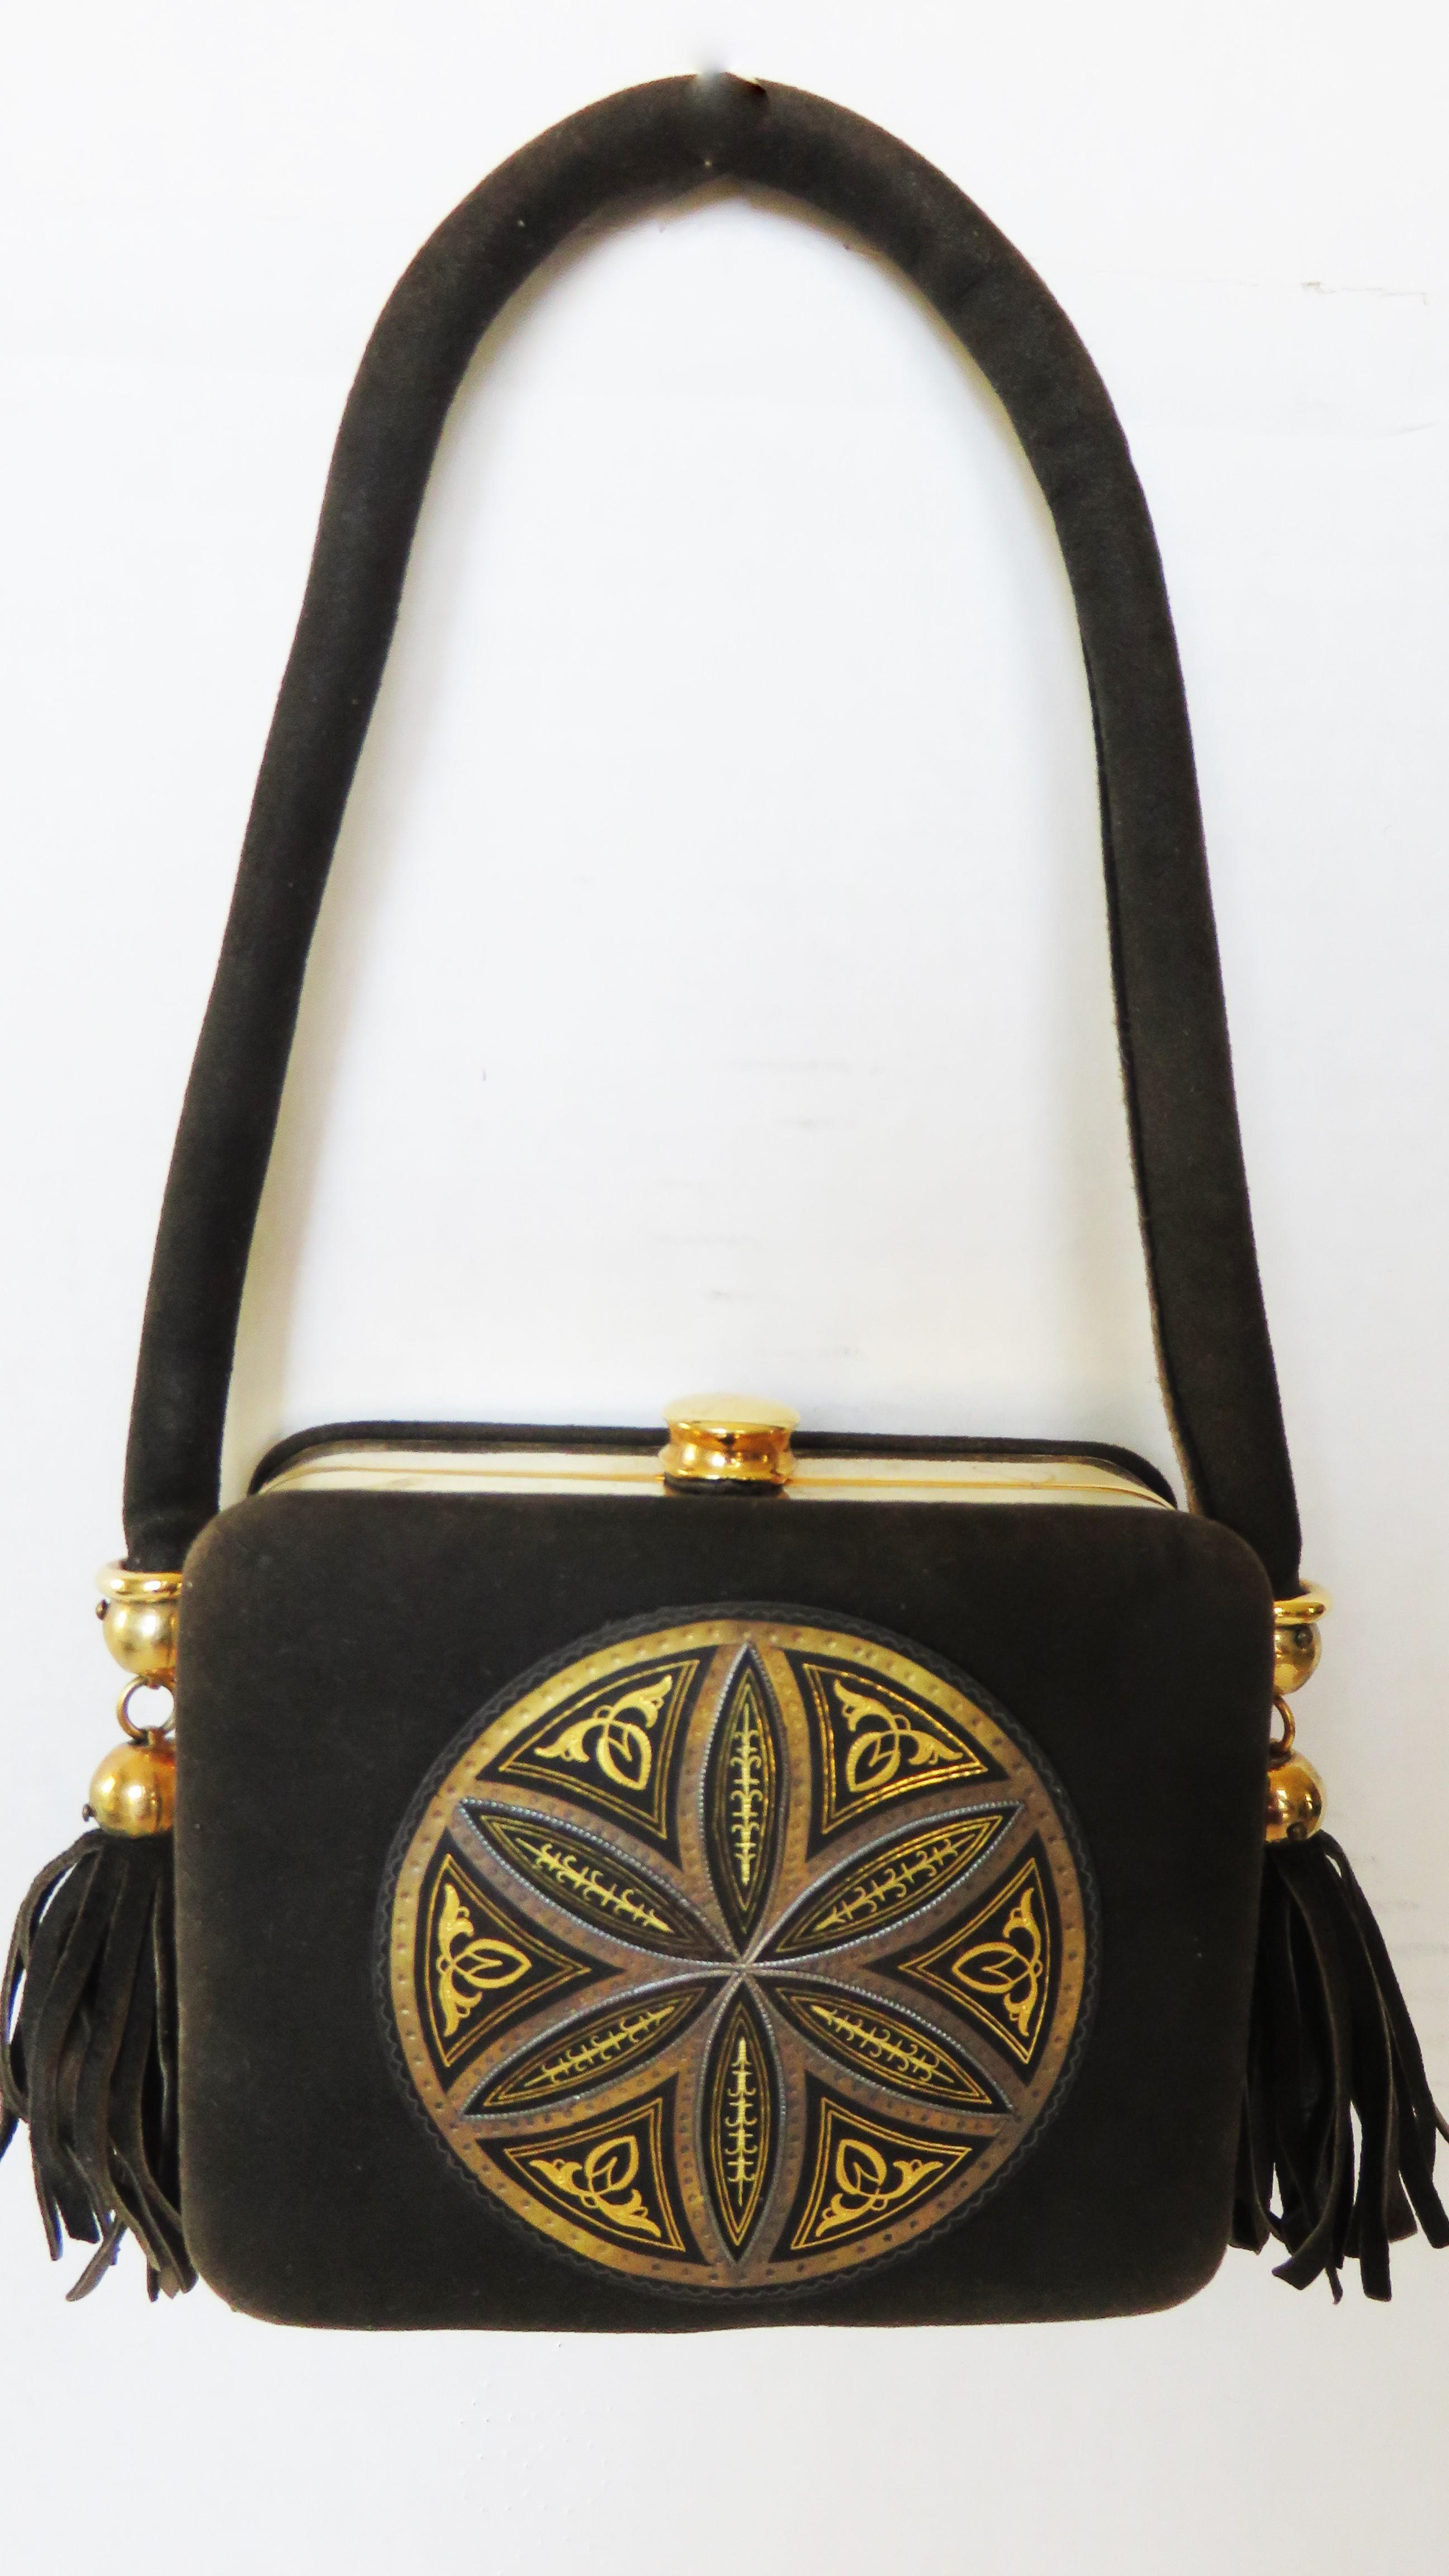 A beautiful black suede minaudiere compact wallet evening bag.  It has a top handle with suede fringe tassels on the ends, a gold metal top snap button closing and frame, and a detailed circular elaborately detailed medallion patch on the front. The